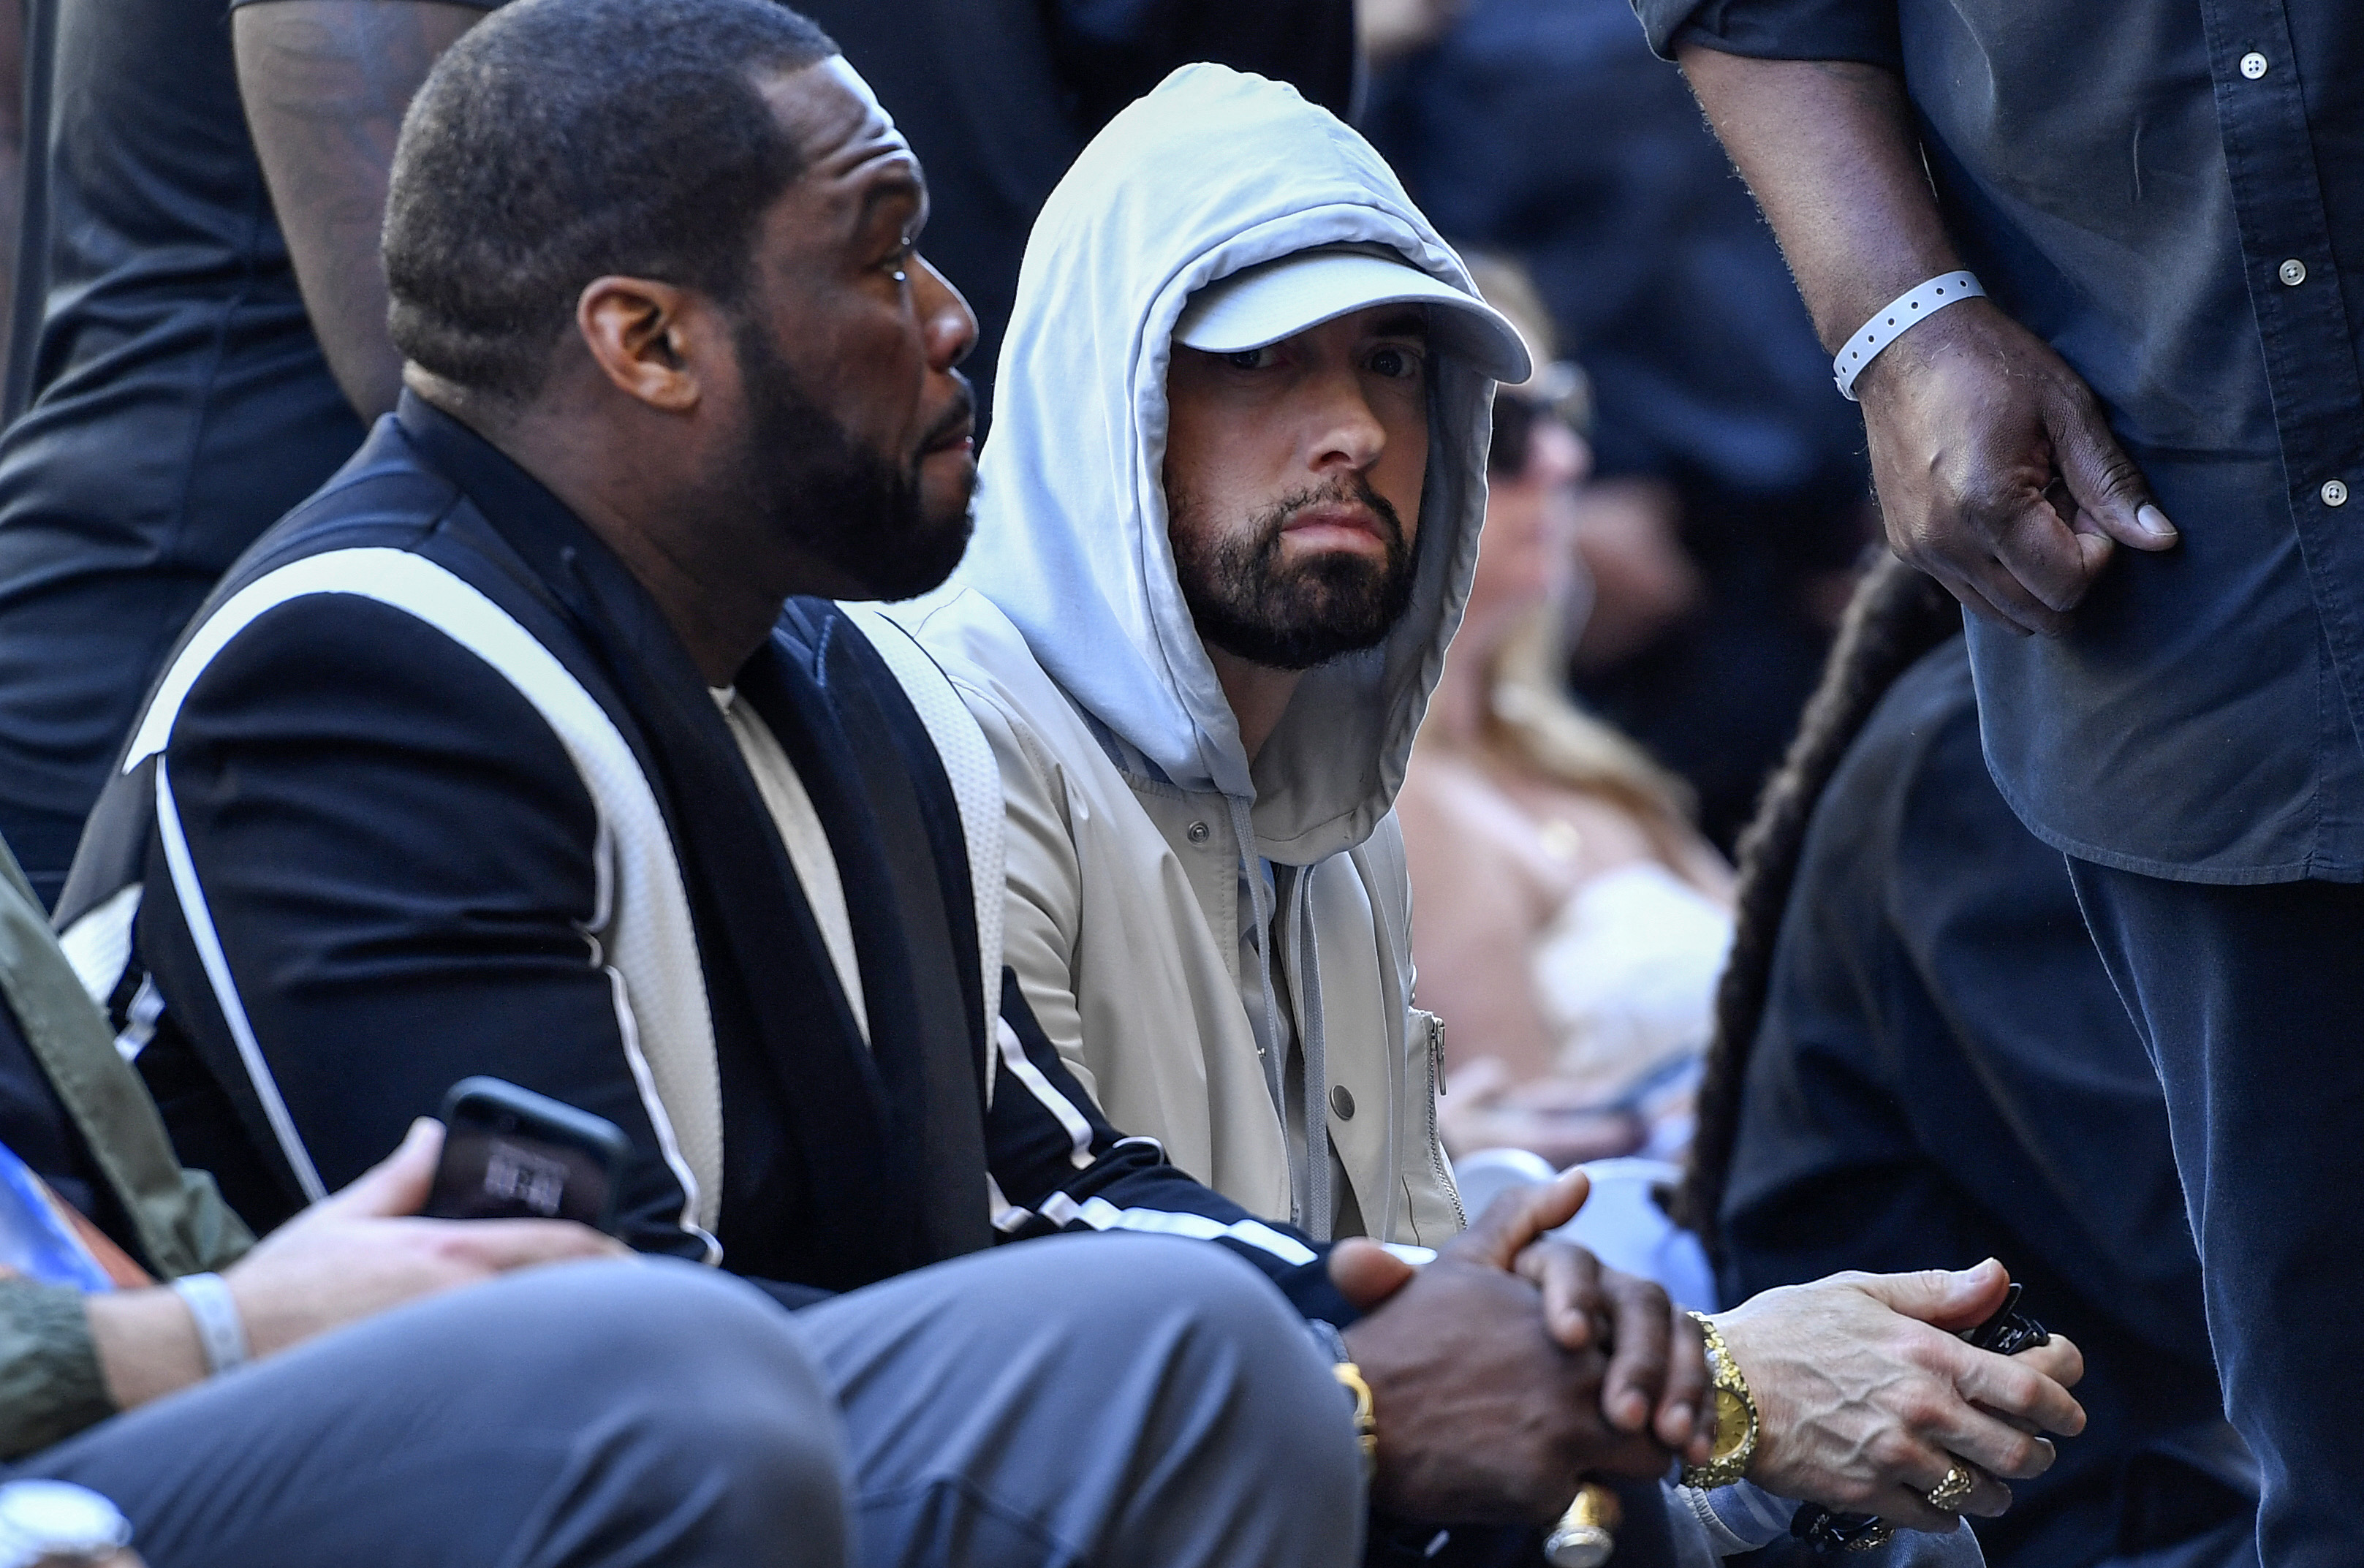 Eminem and 50 Cent at the Hollywood Walk of Fame Star Ceremony for Dr. Dre.